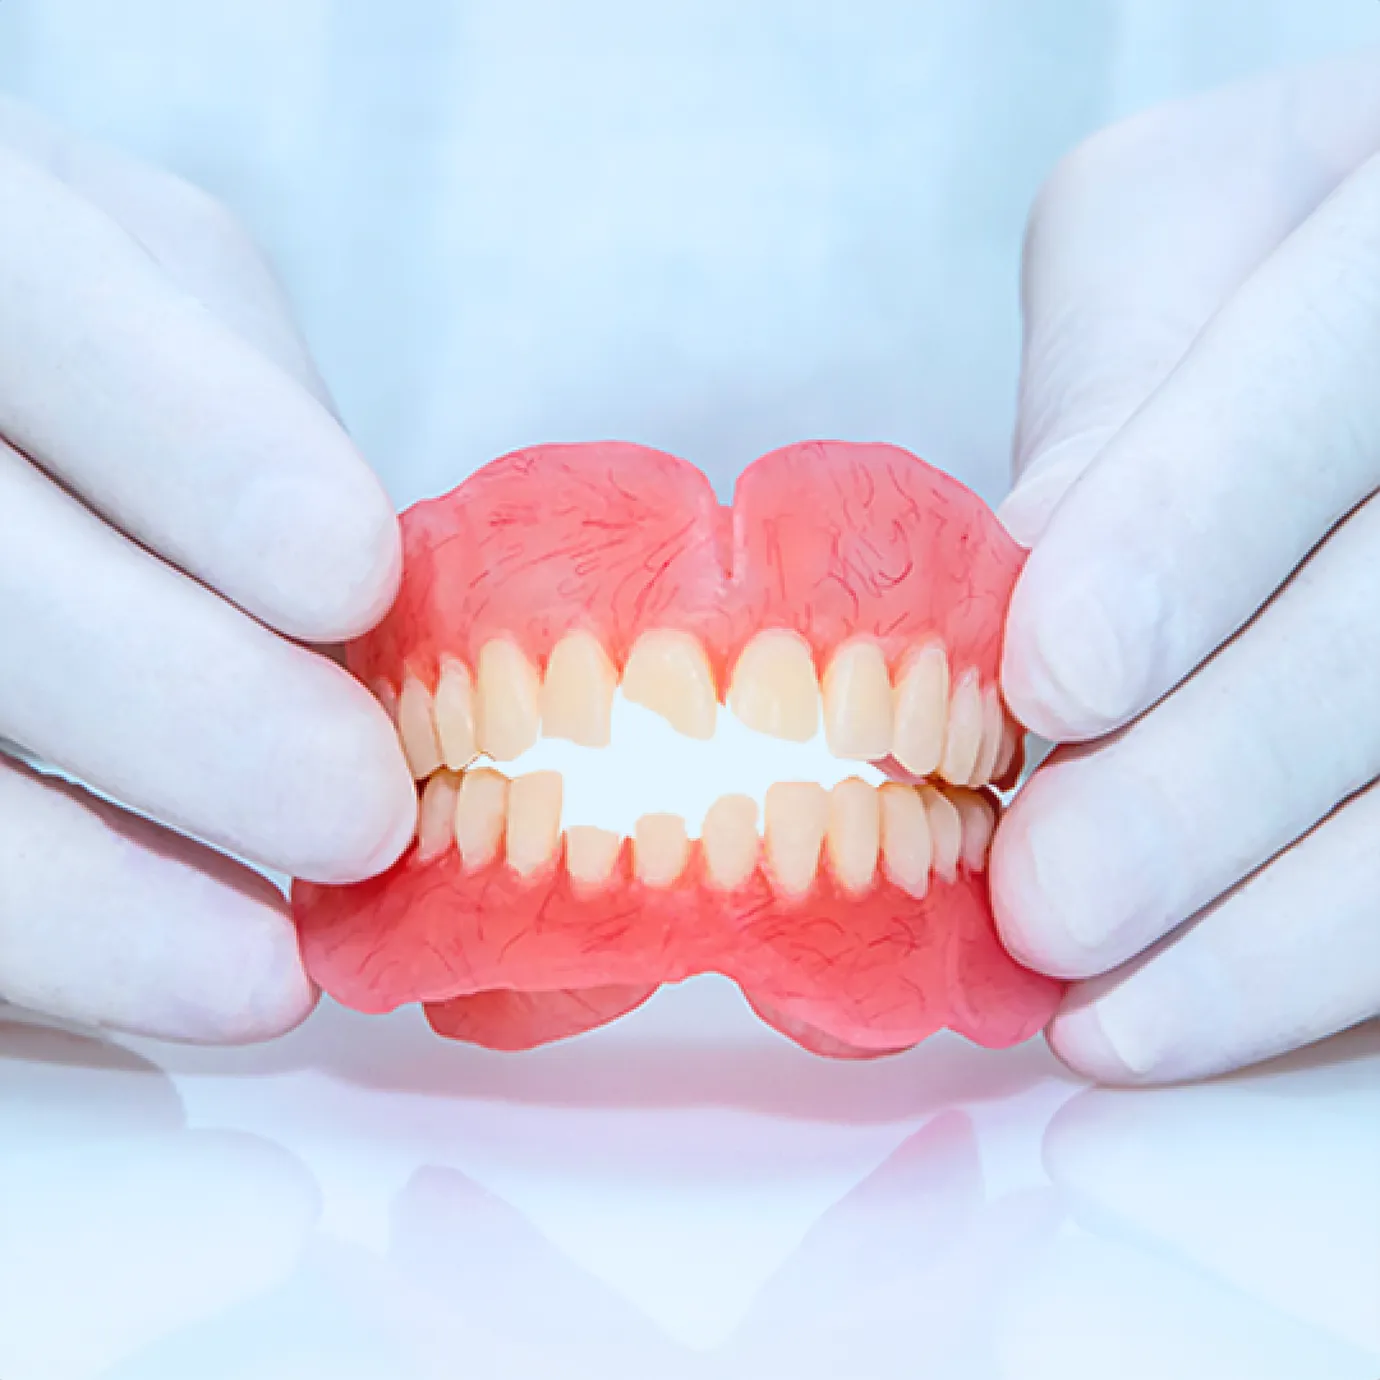 What should I do if my denture breaks?